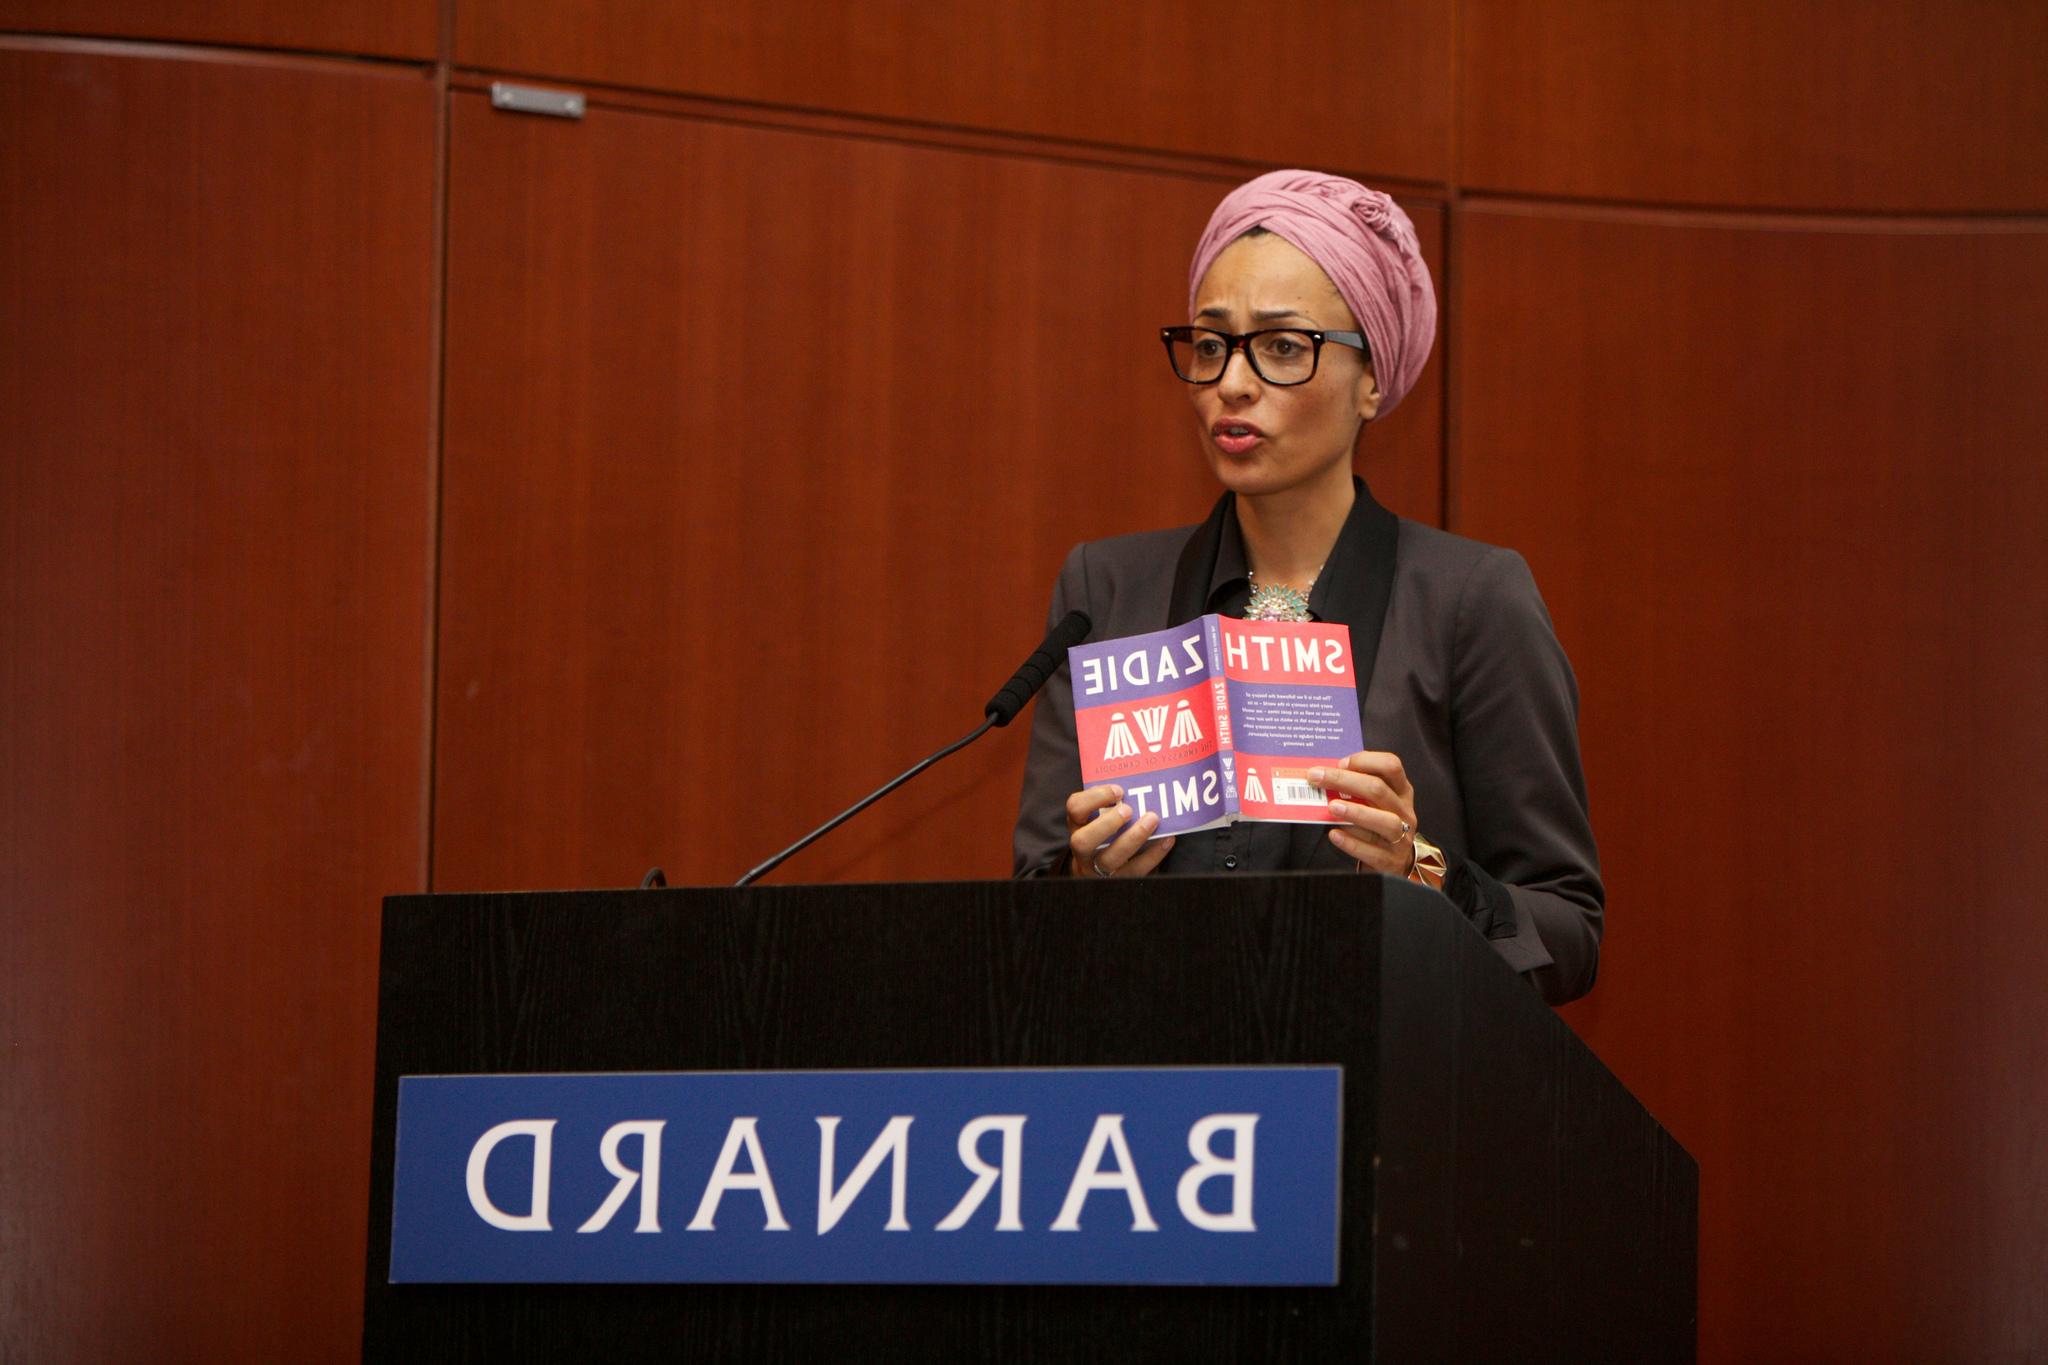 photo of the woman writer Zadie Smith standing at a podium